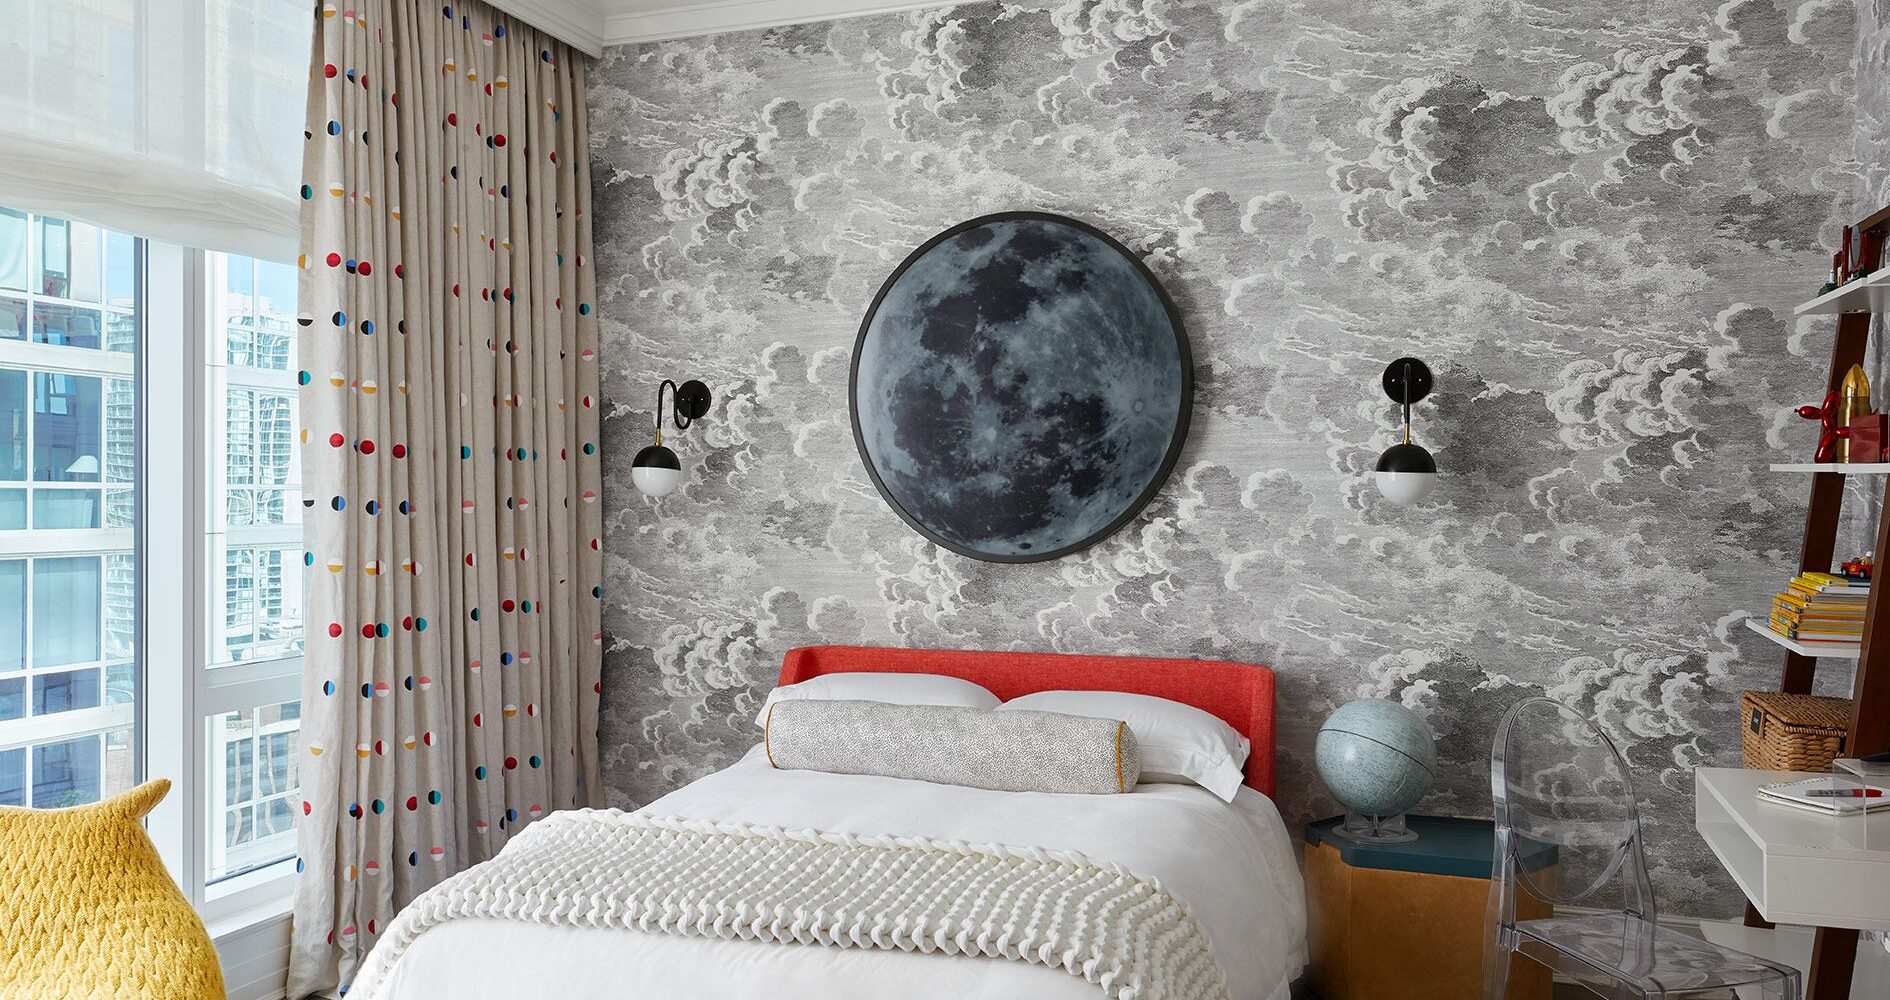 Boys Bedroom incorporating grey clouds wallcovering, red upholstered bed, moon light above bed.